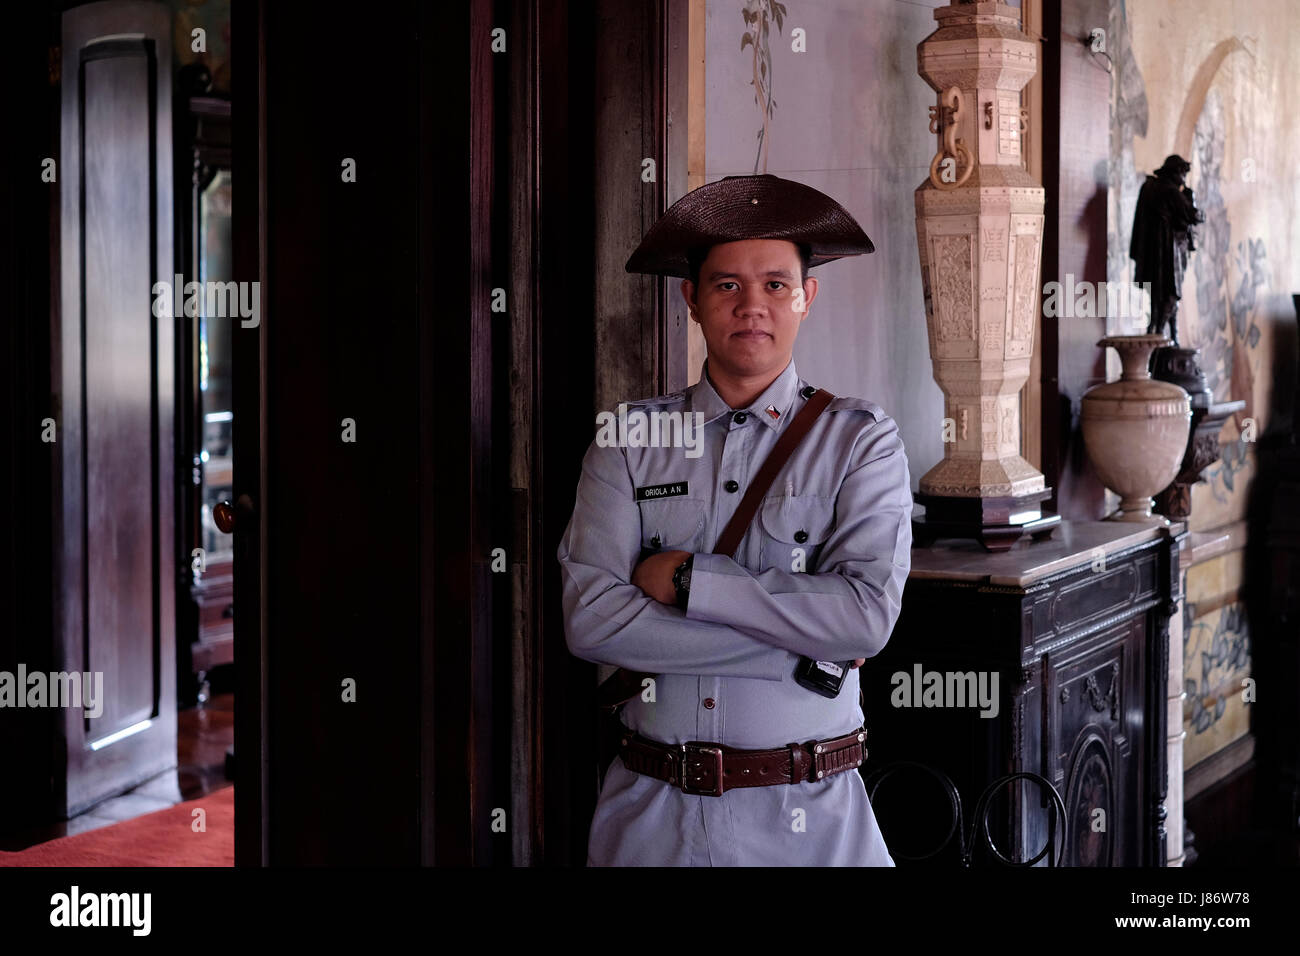 A uniformed Filipino guard dressed as a soldier of the Spanish colonial period stands inside Casa Manila, containing late 19th century and early 20th century furniture found in a typical  Filipino-Hispanic class home located at Plaza San Luis complex representing different eras in Filipino-Hispanic architecture located inside the walled city of Manila referred to as Intramuros in the city of Manila capital of the Philippines Stock Photo